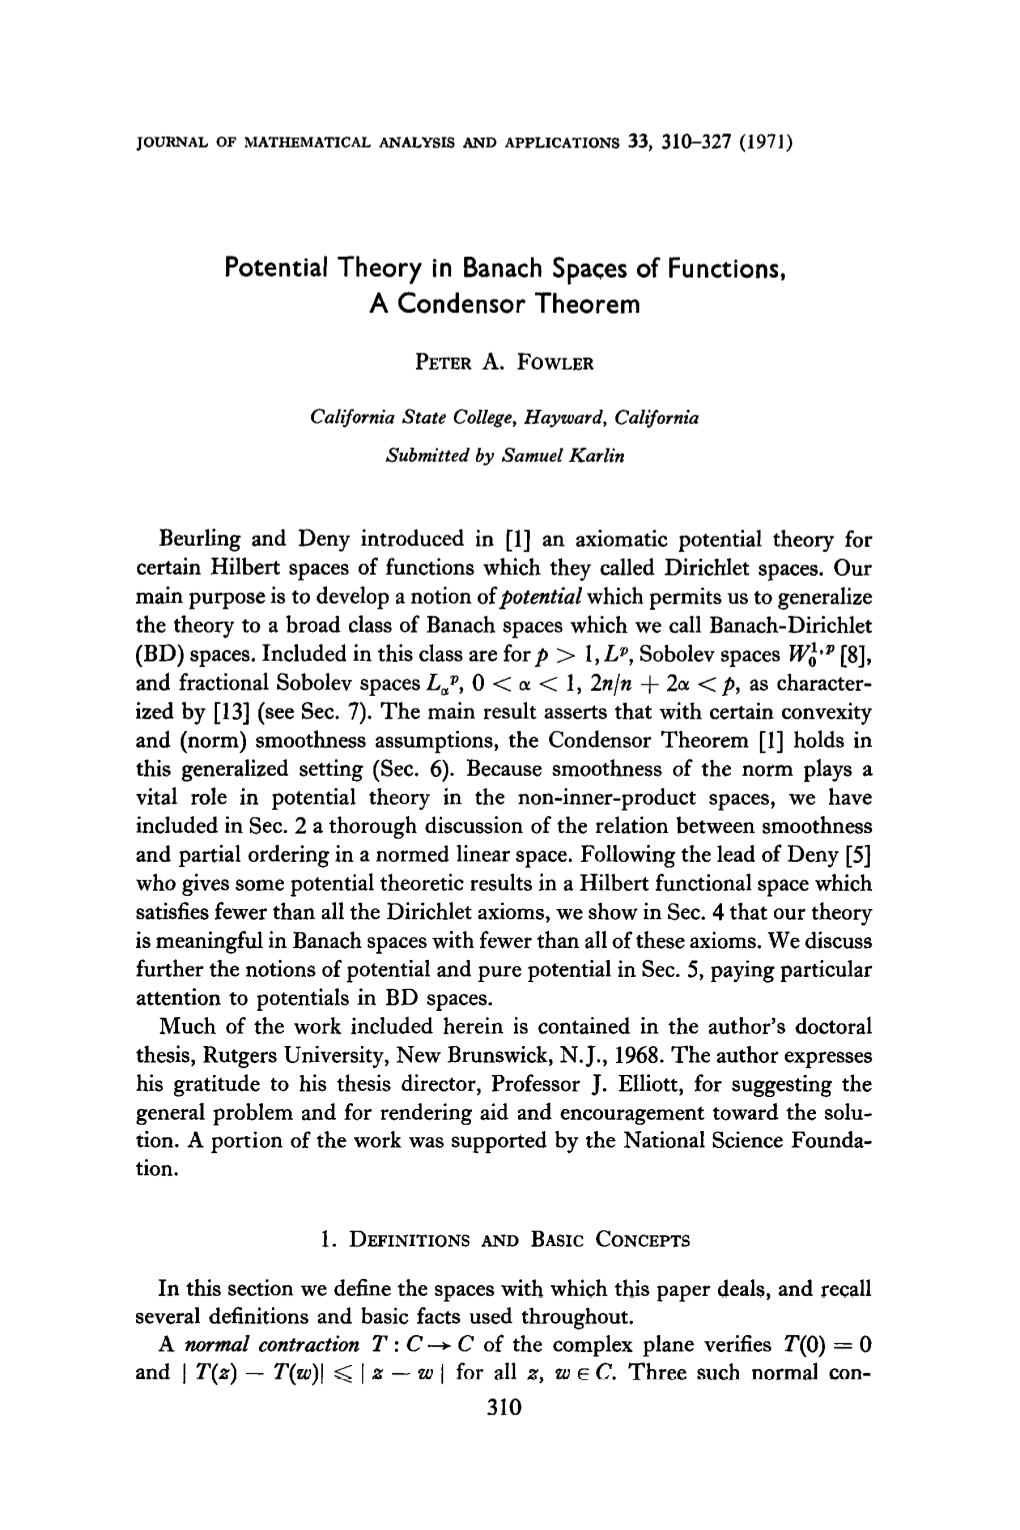 Potential Theory in Banach Spaces of Functions, a Condensor Theorem